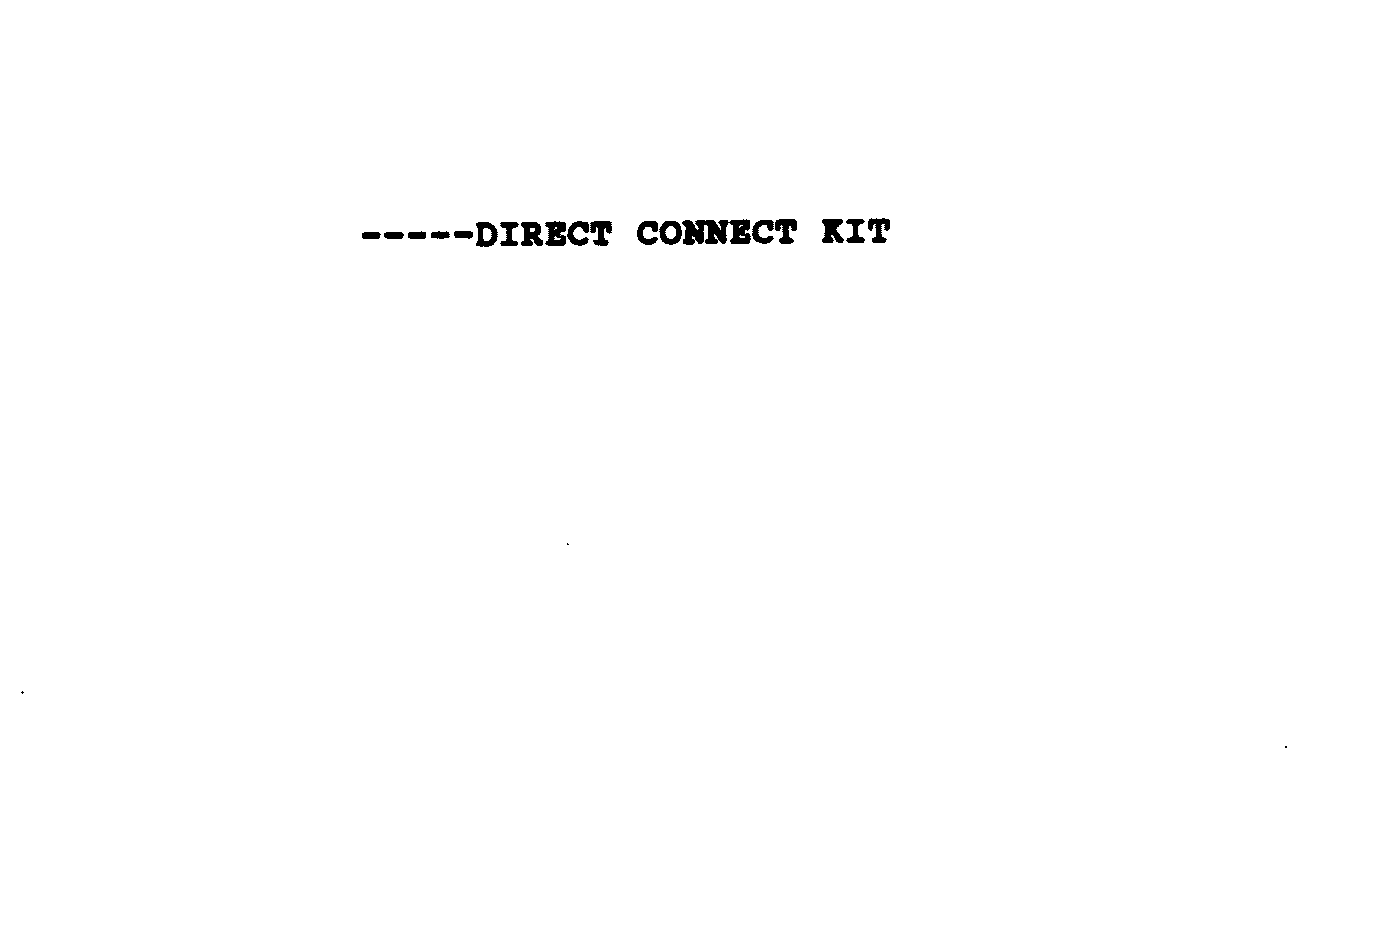  DIRECT CONNECT KIT